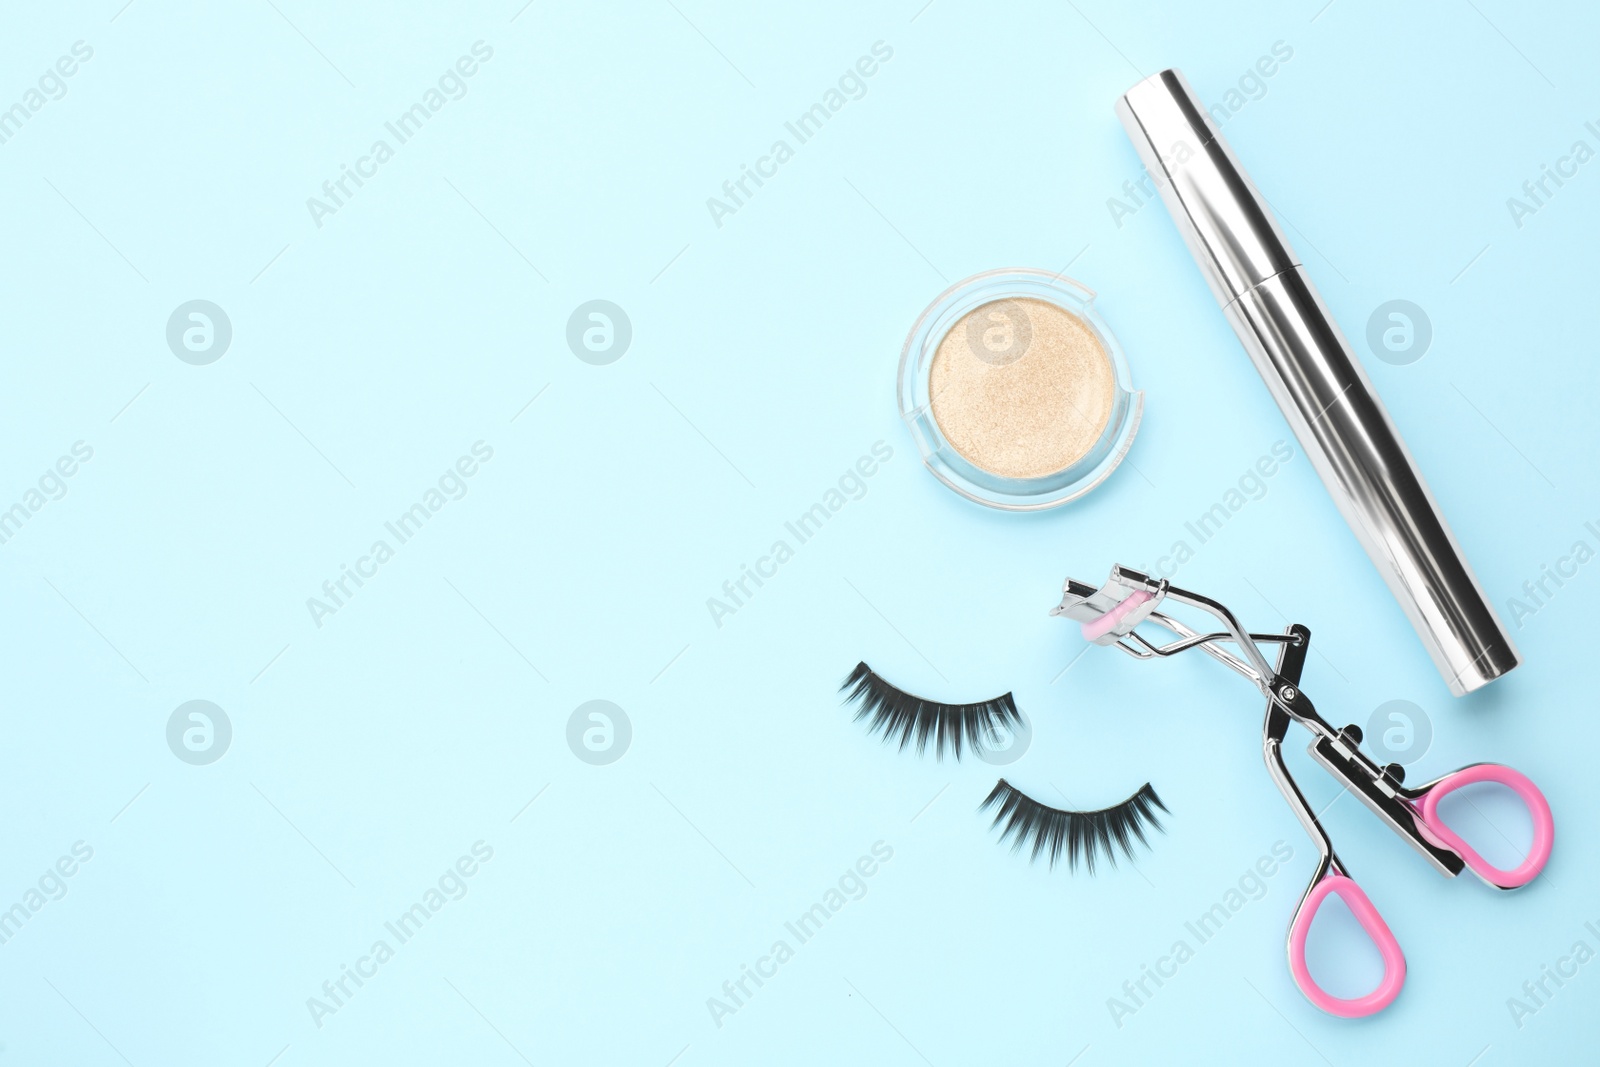 Photo of Eyelash curler and makeup products on light blue background, flat lay. Space for text